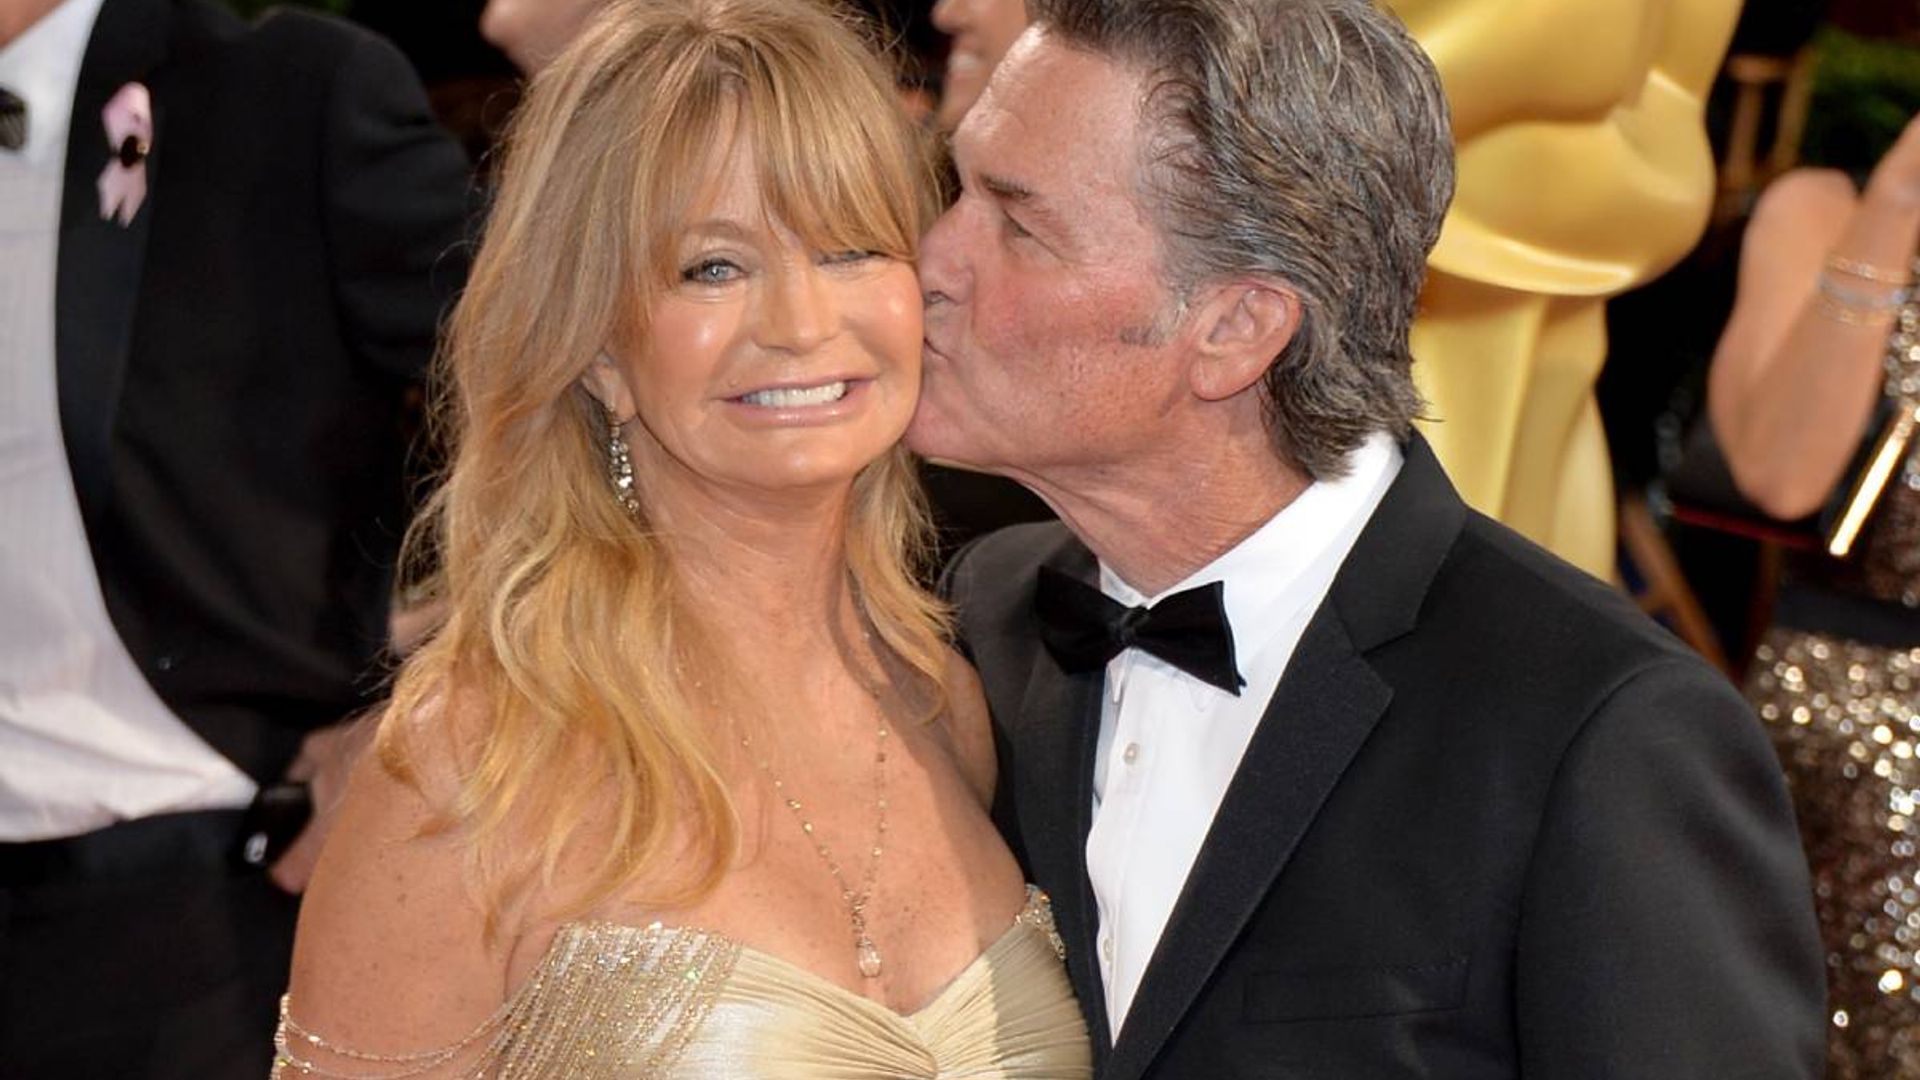 Goldie Hawn and Kurt Russell to become grandparents again – see sweet post